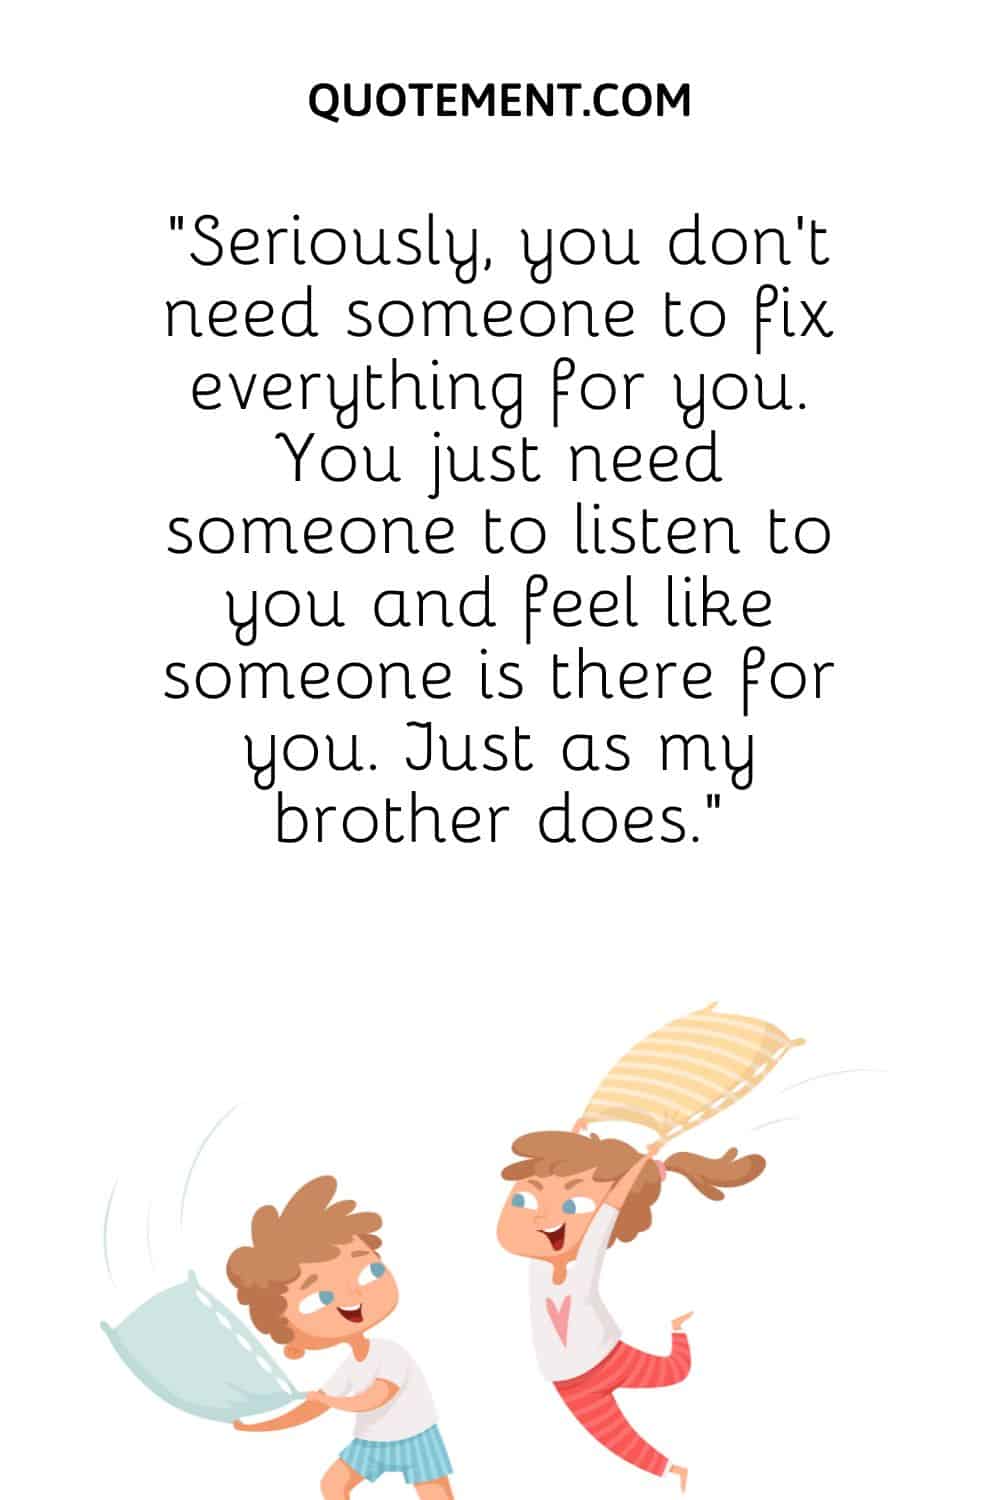 Seriously, you don’t need someone to fix everything for you.